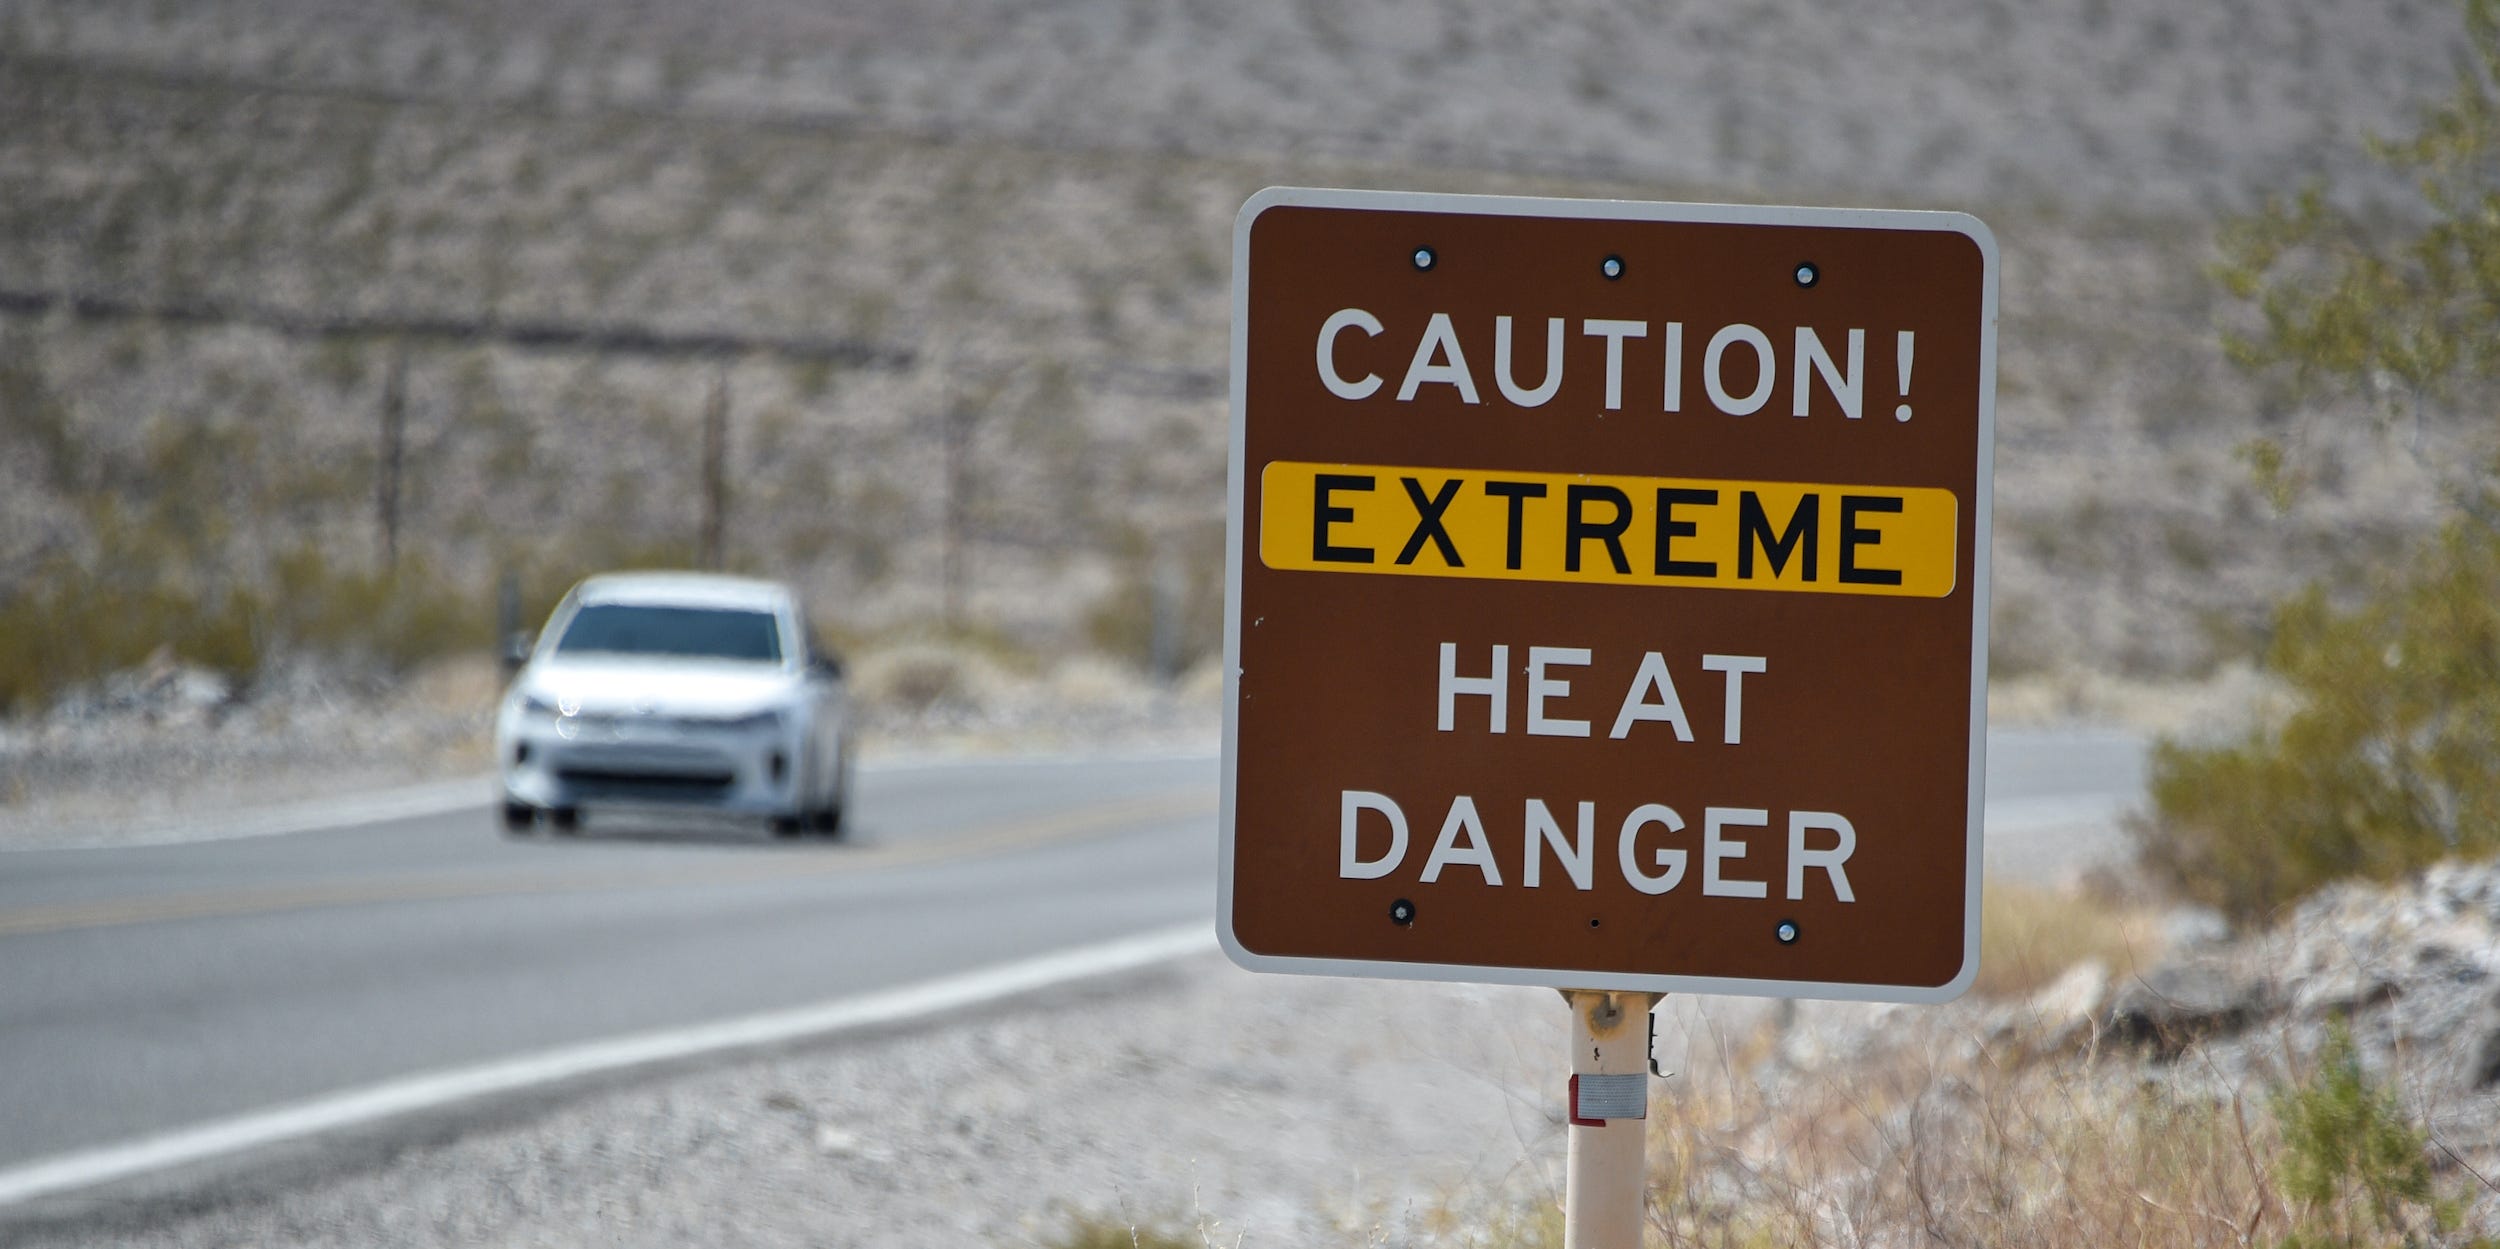 A posted sign warns motorists of extreme heat dangers in Death Valley National Park, in Furnace Creek, California, U.S. August 17, 2020.